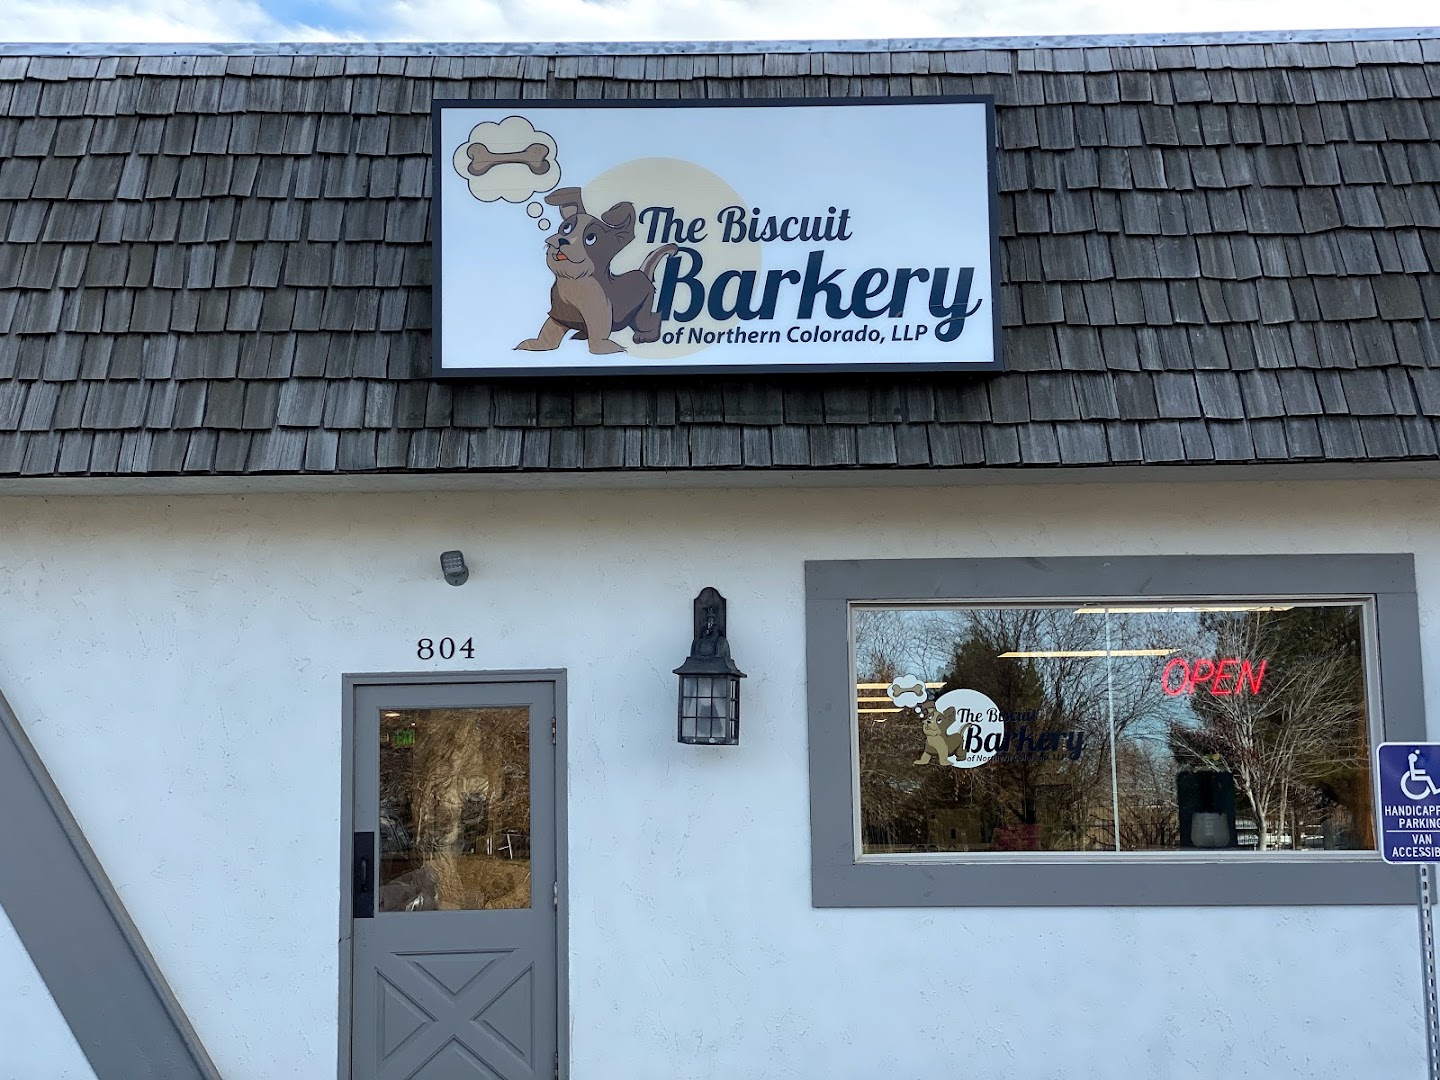 The Biscuit Barkery of N. Colorado